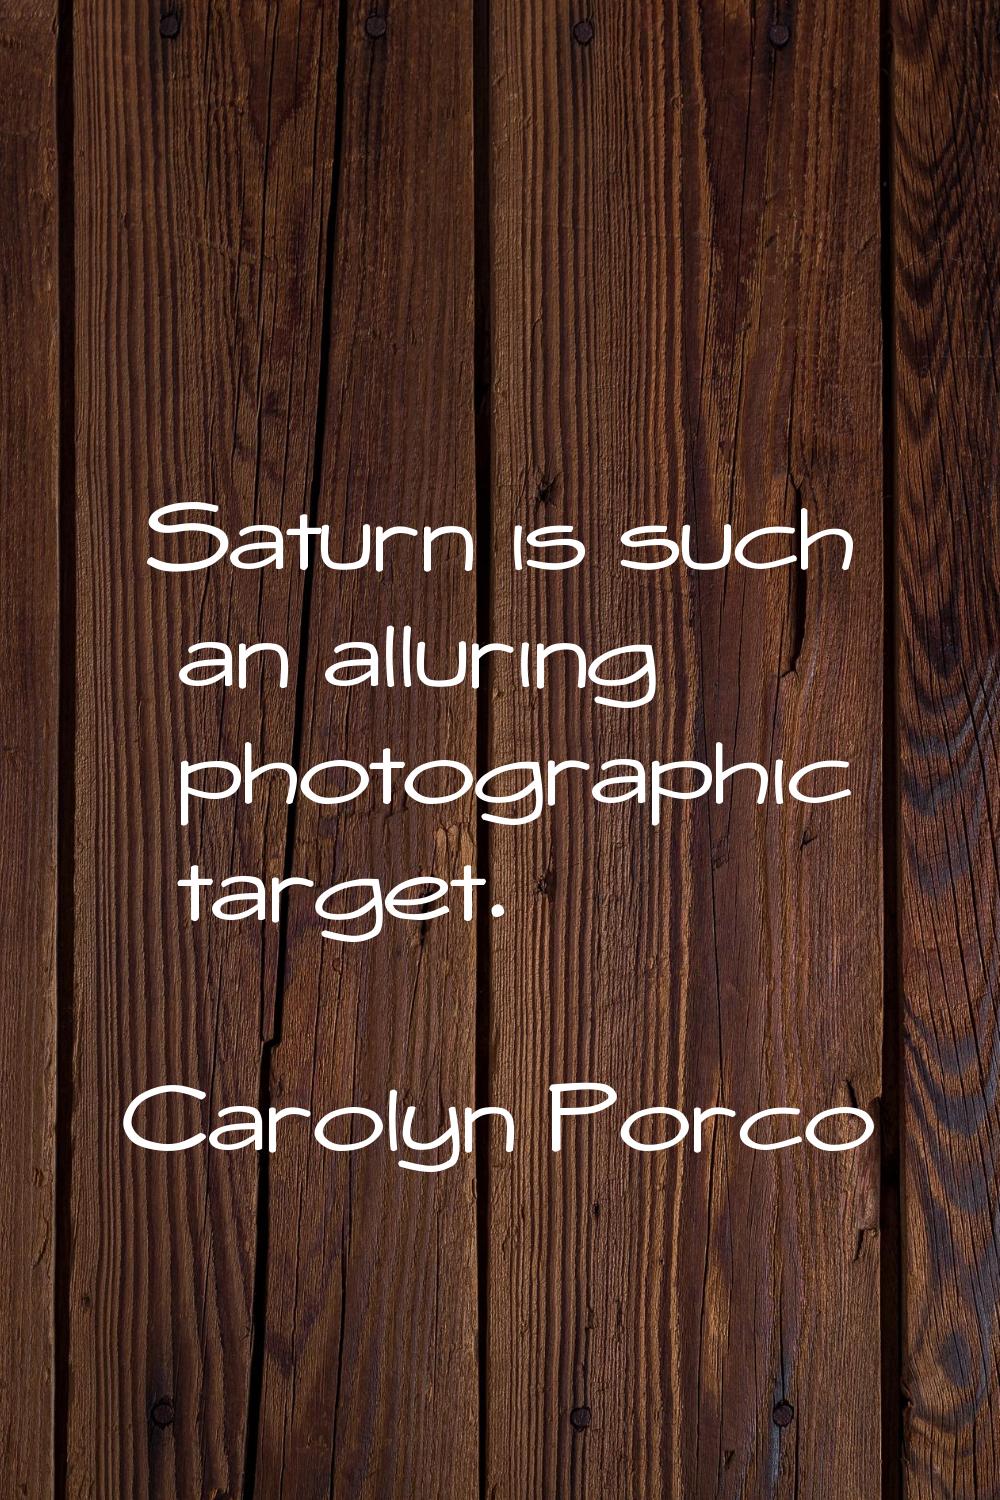 Saturn is such an alluring photographic target.